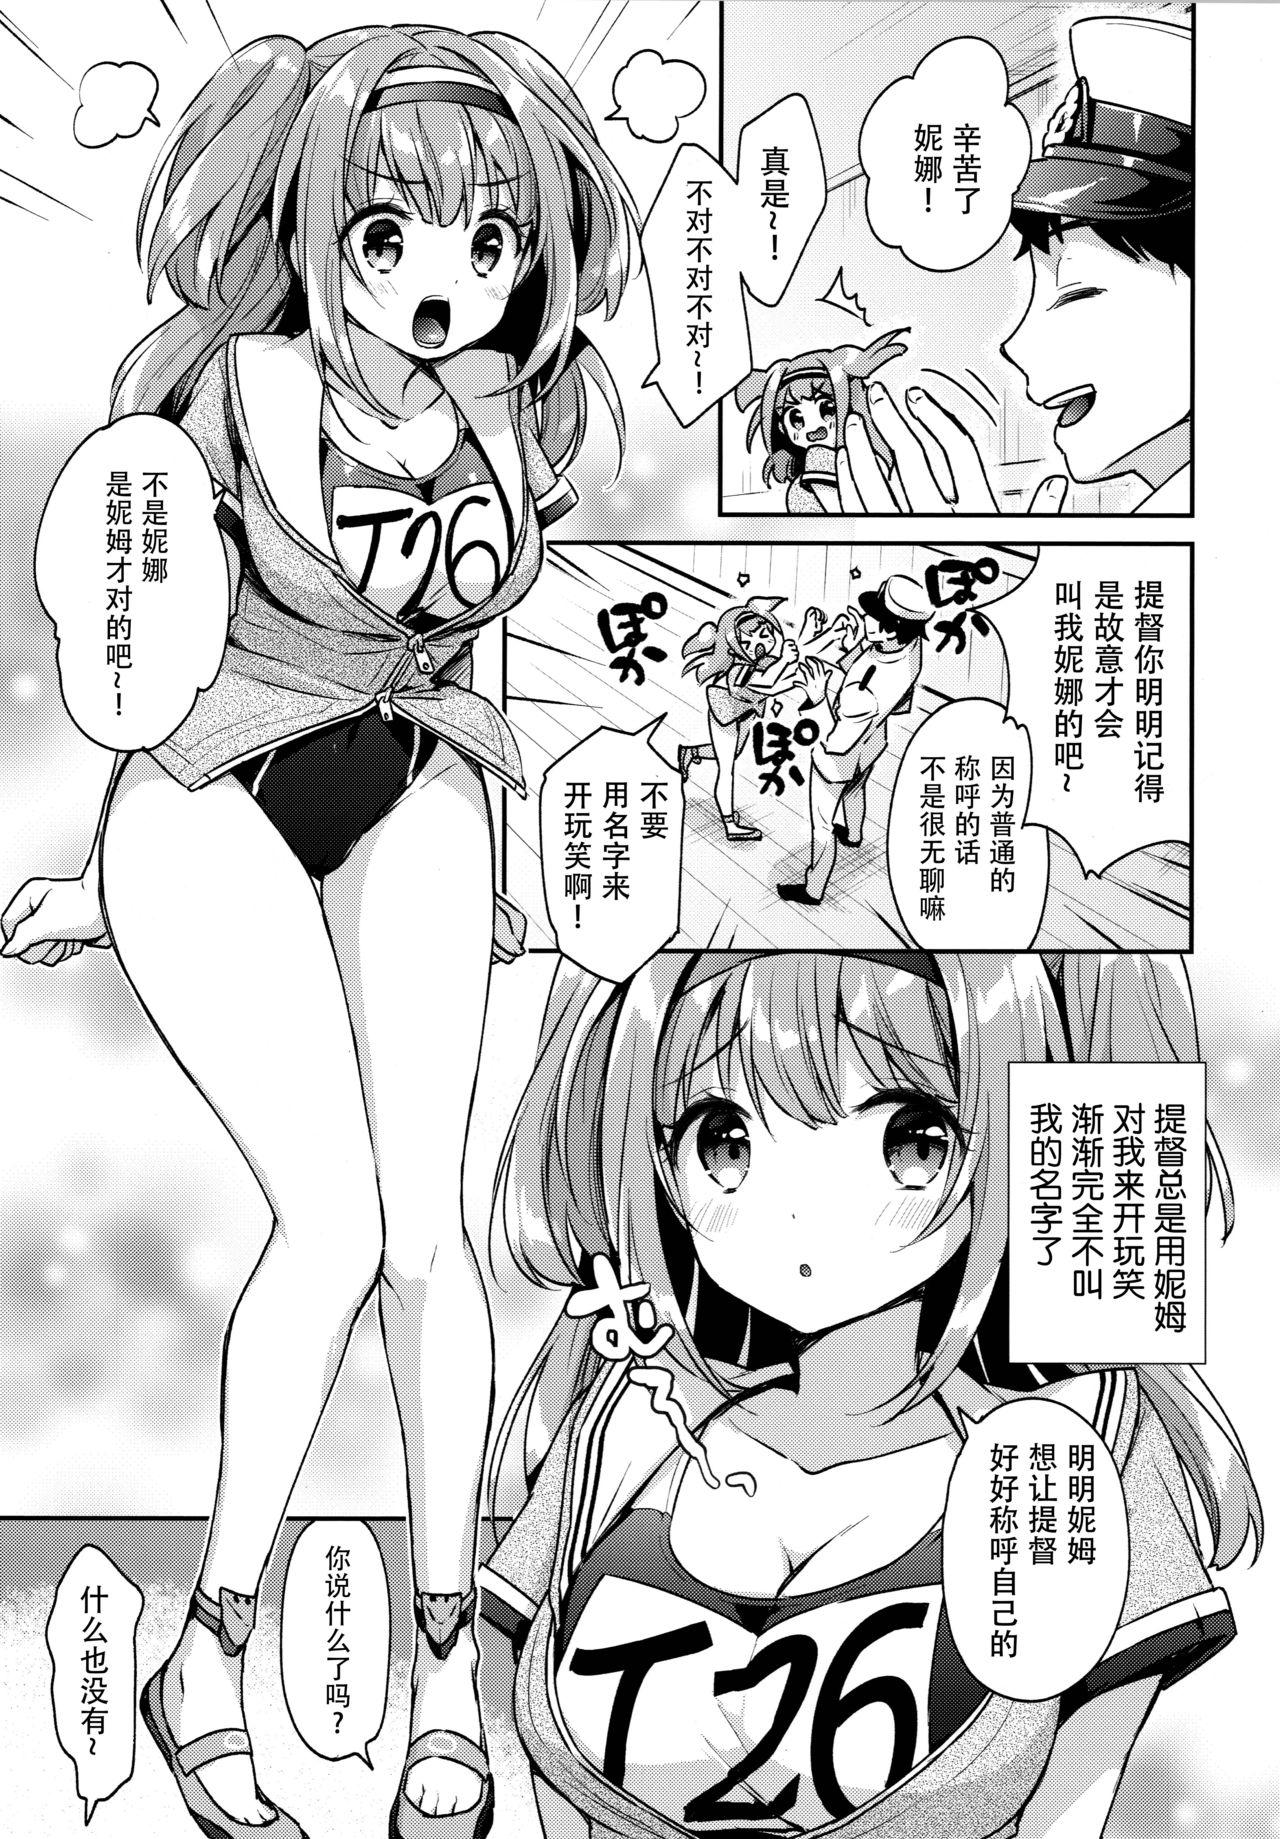 Gostoso Nimu tte Yonde - Kantai collection Real Amature Porn - Page 5